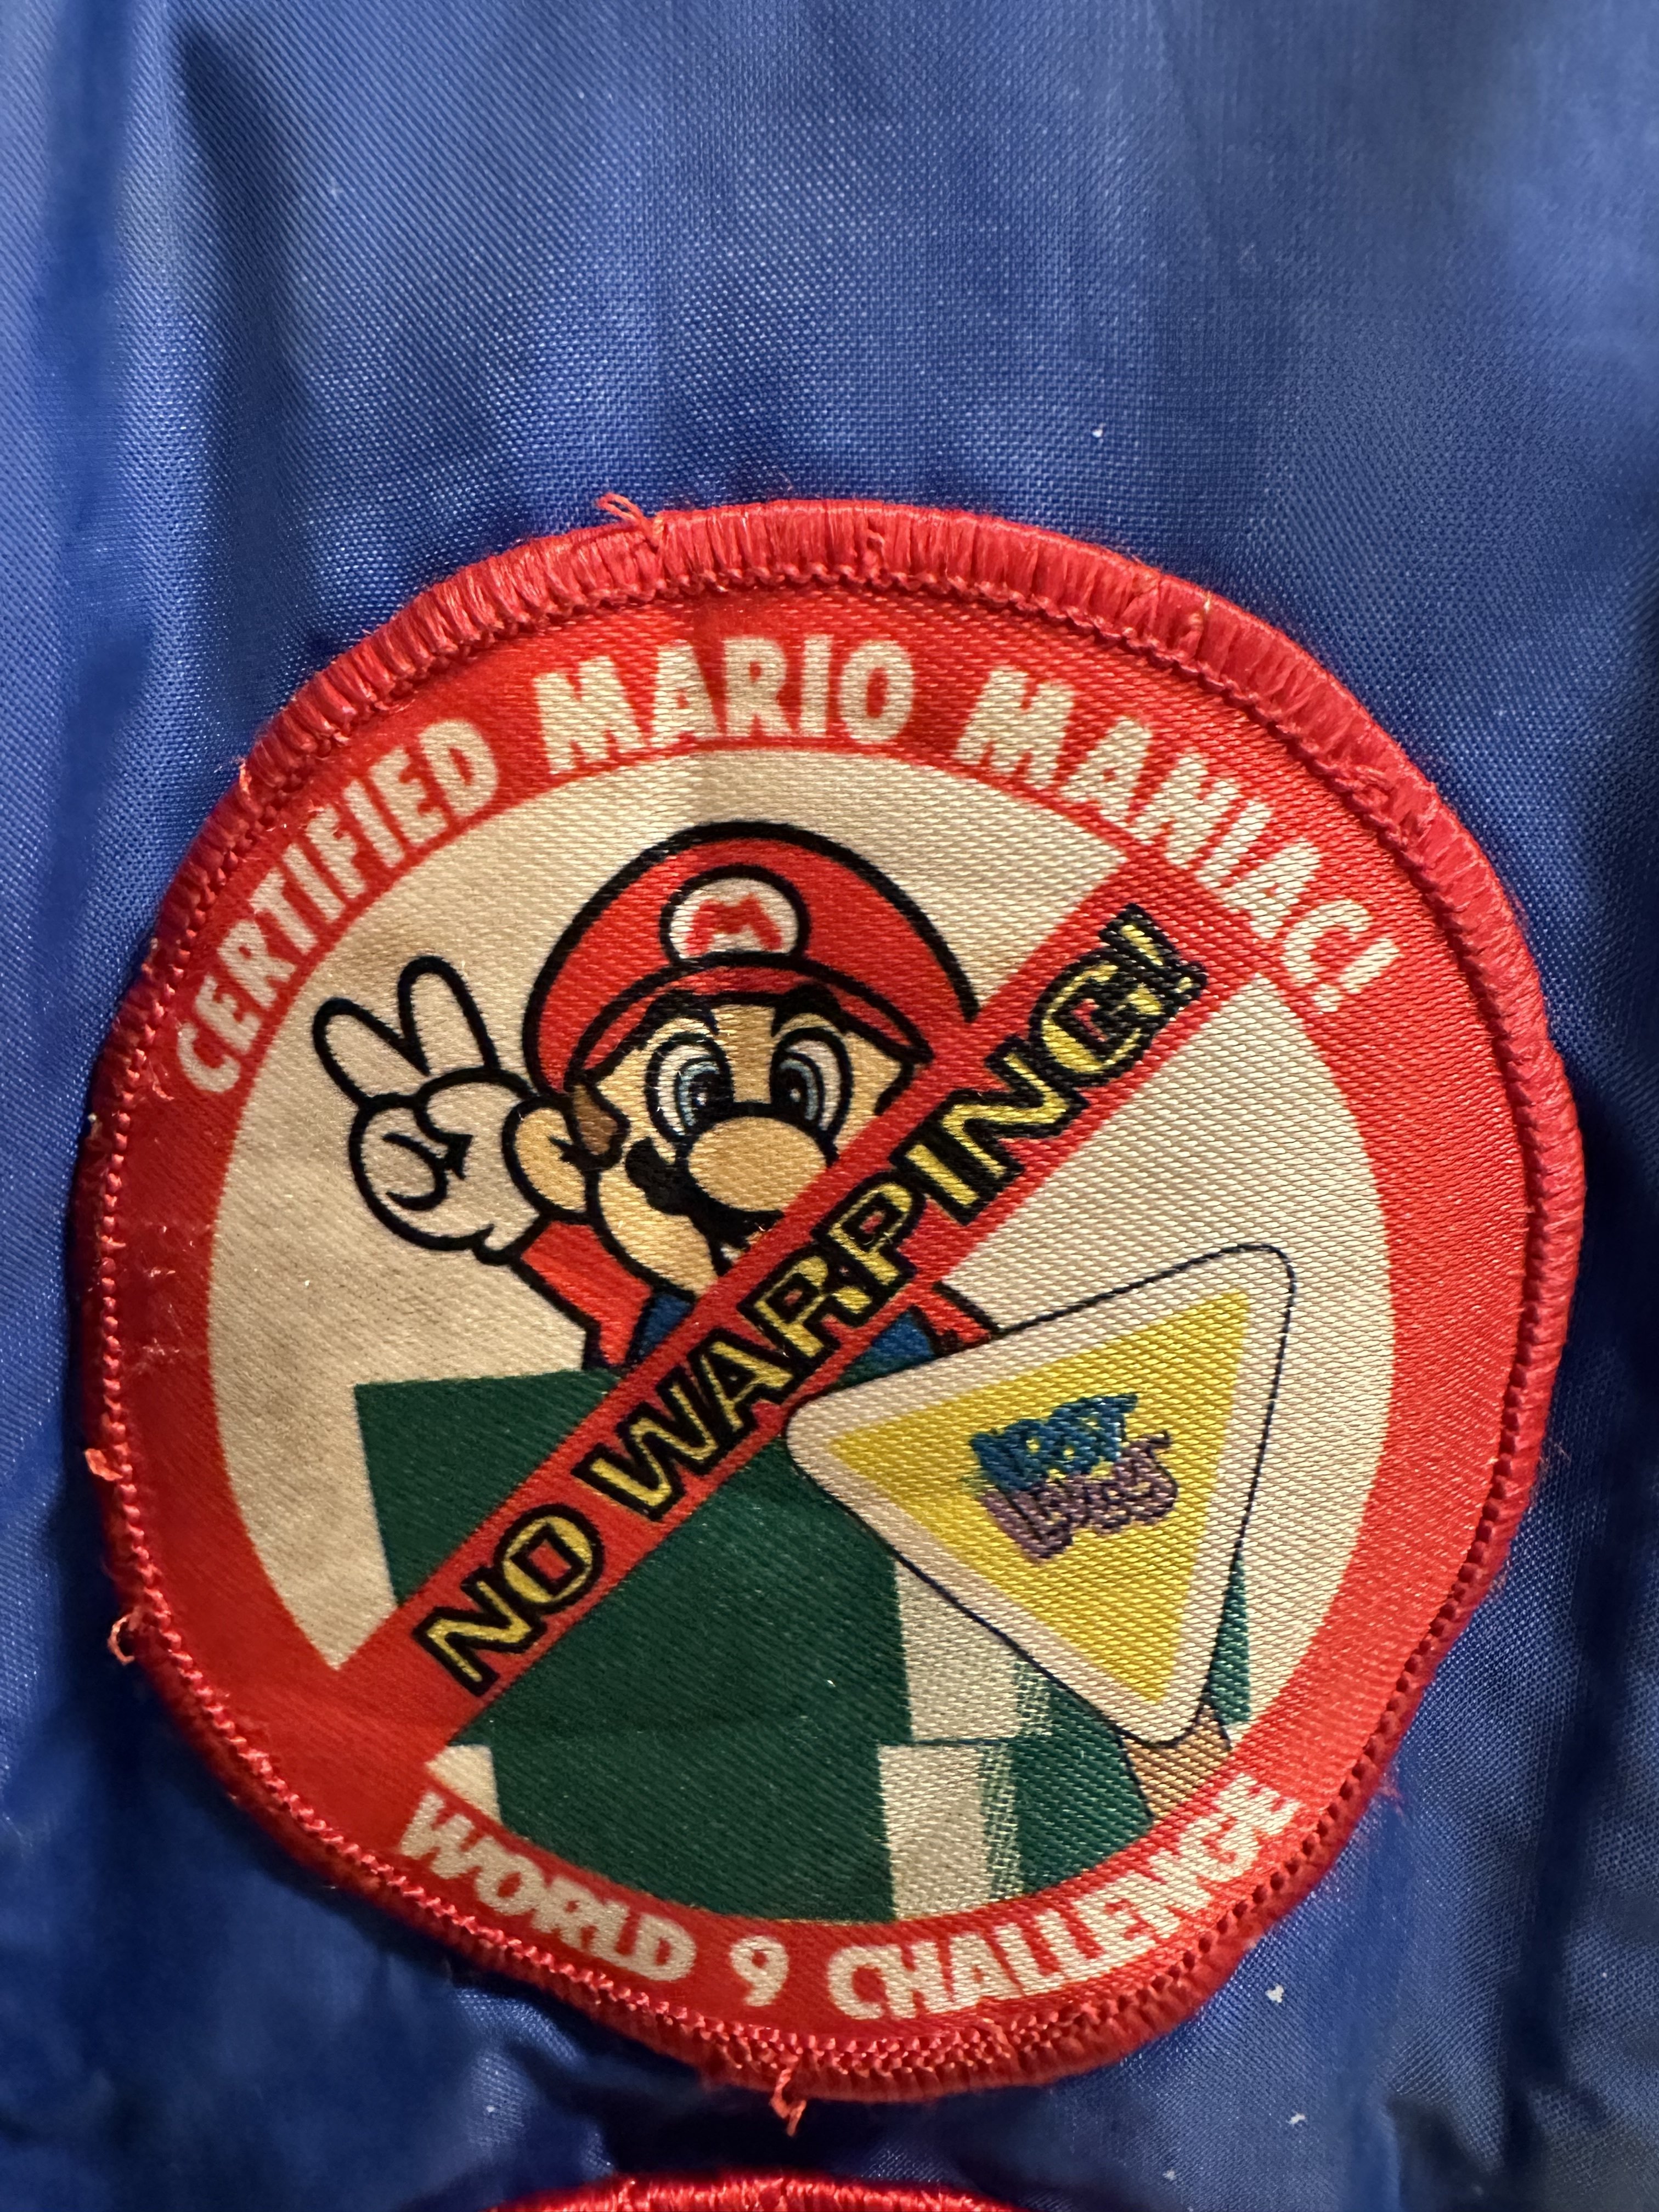 Pic of the patch